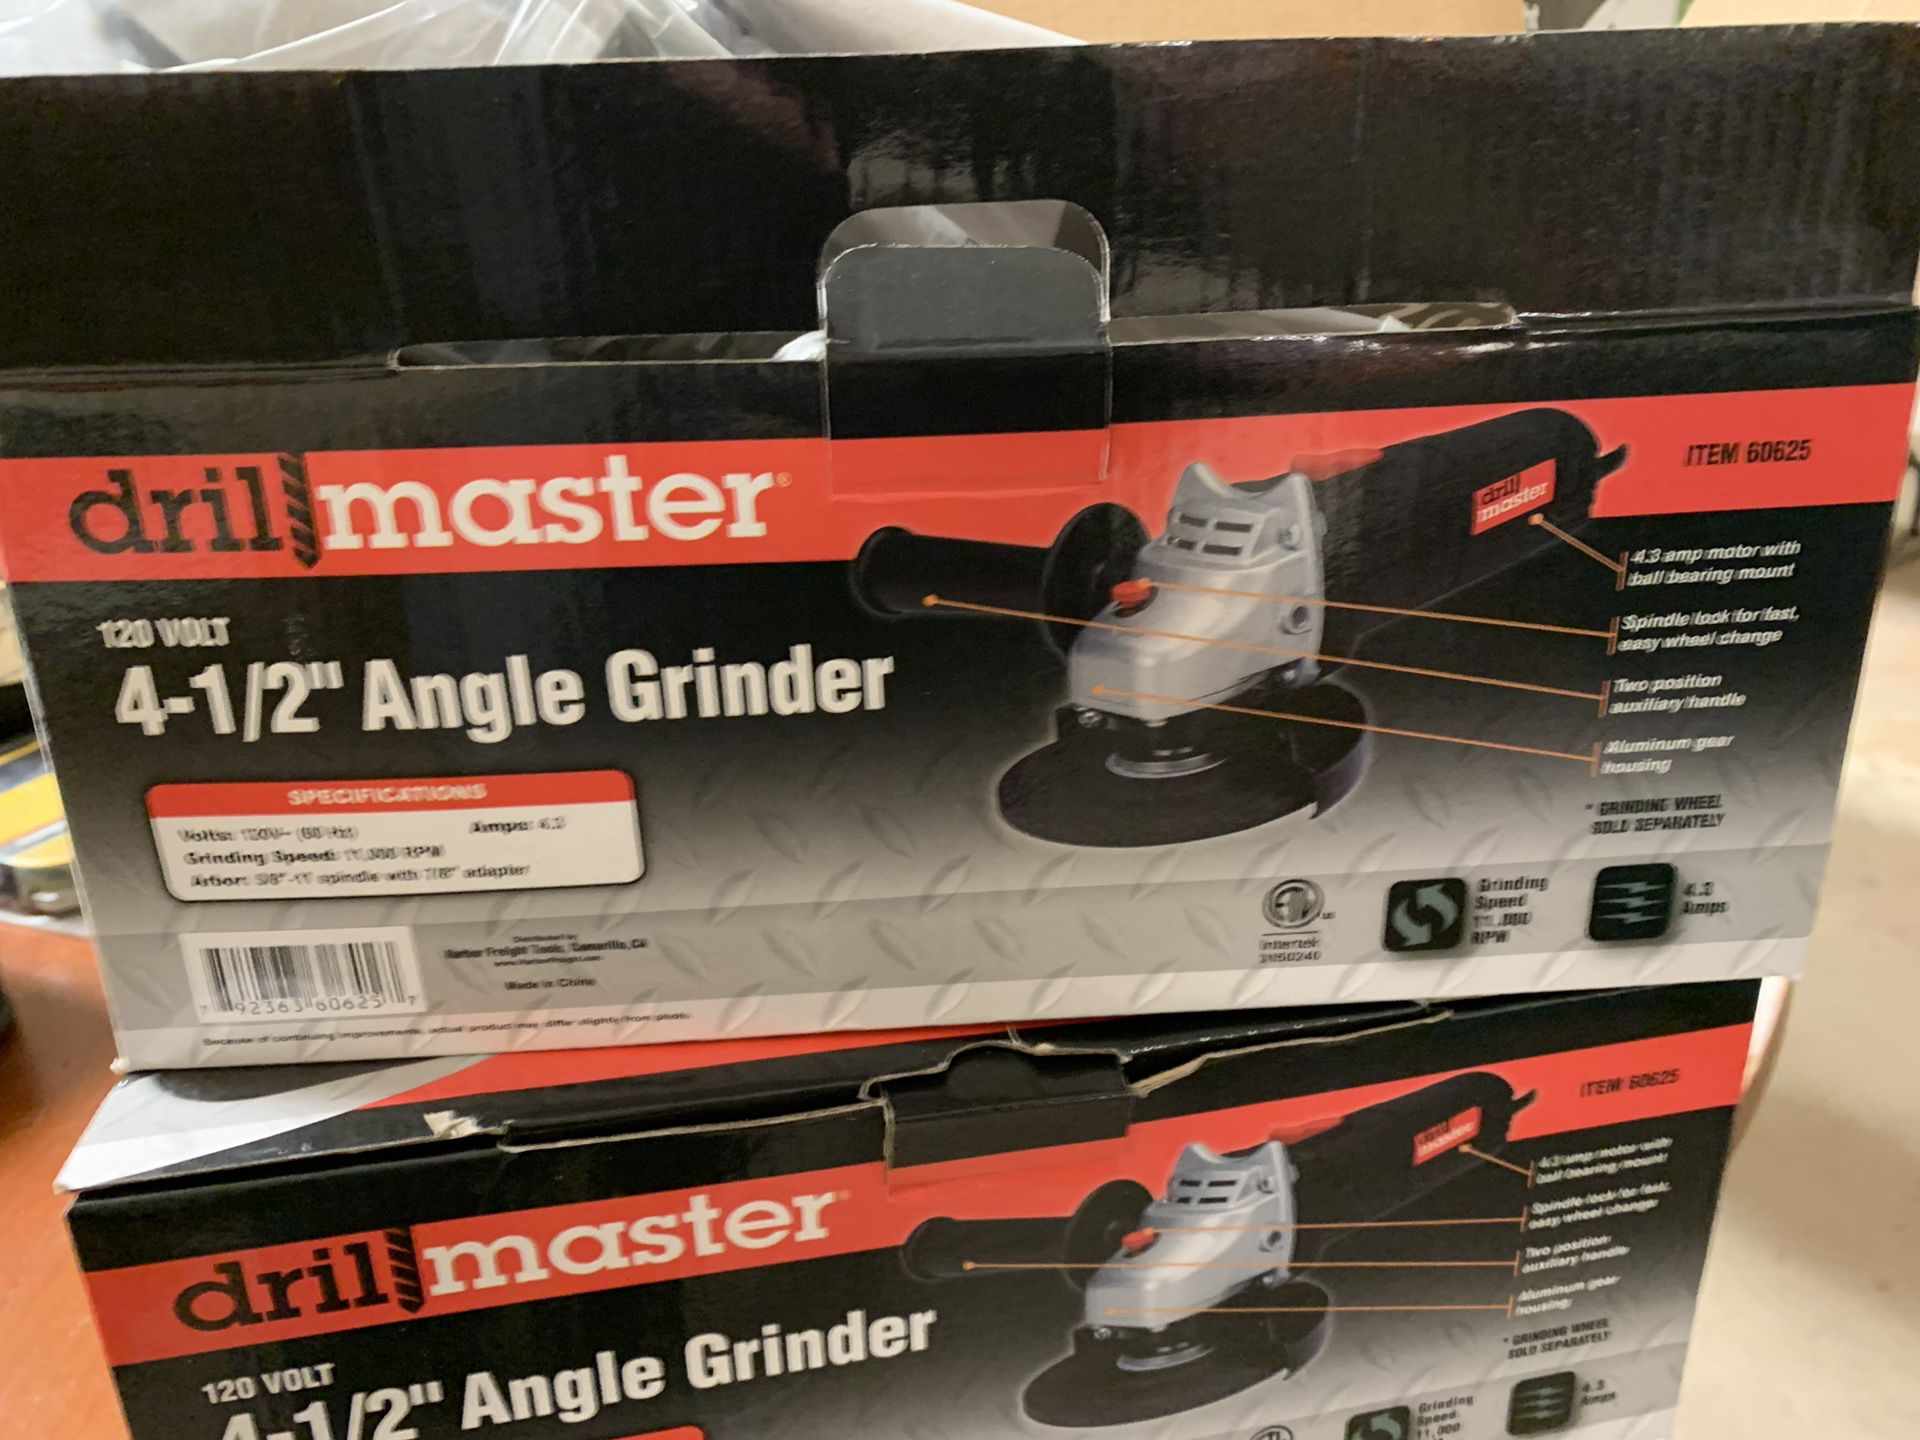 Angle grinder Drill master